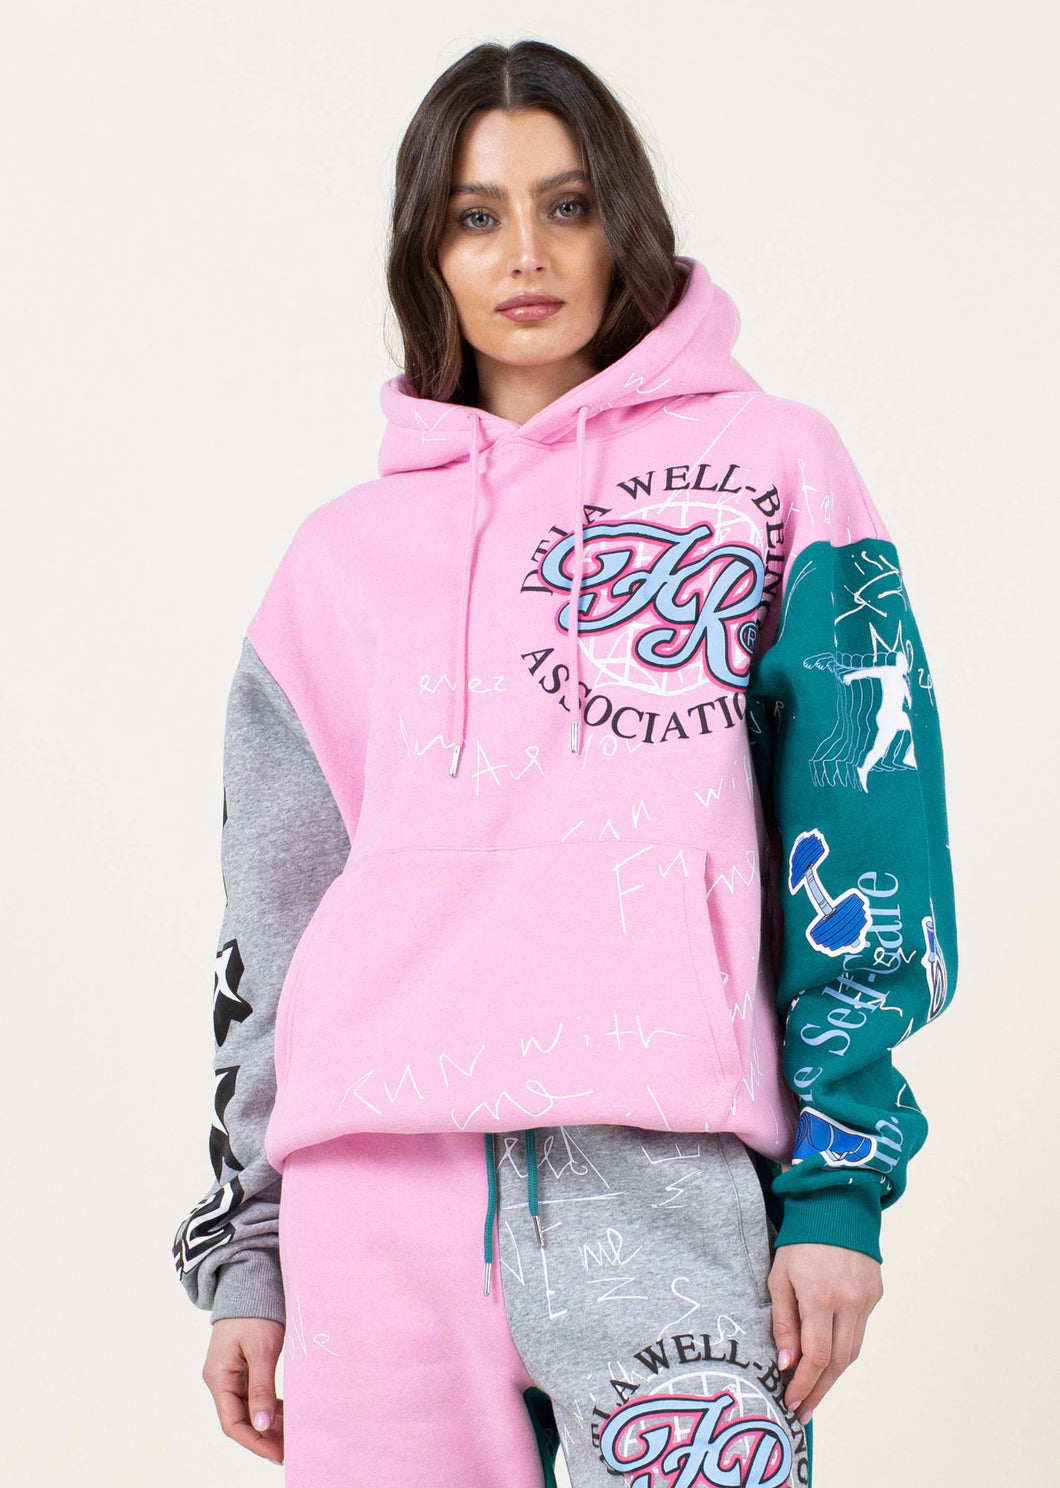 PINK, GREEN AND GREY COLOR BLOCK WELLBEING ASSOC HOODIE